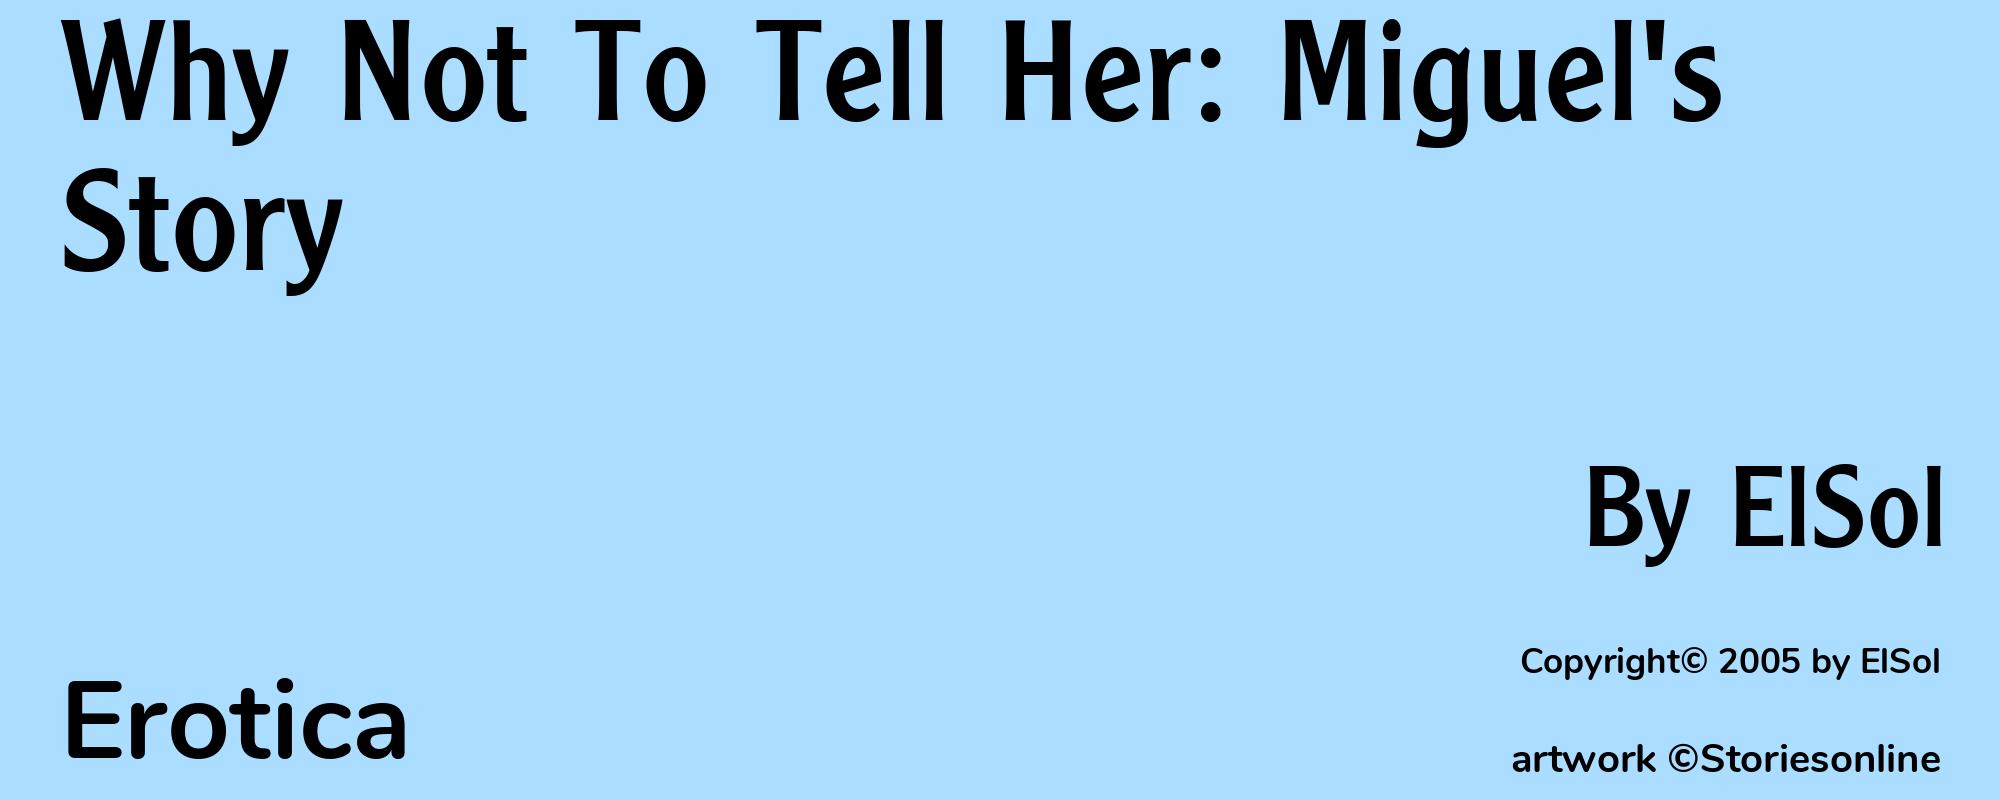 Why Not To Tell Her: Miguel's Story - Cover